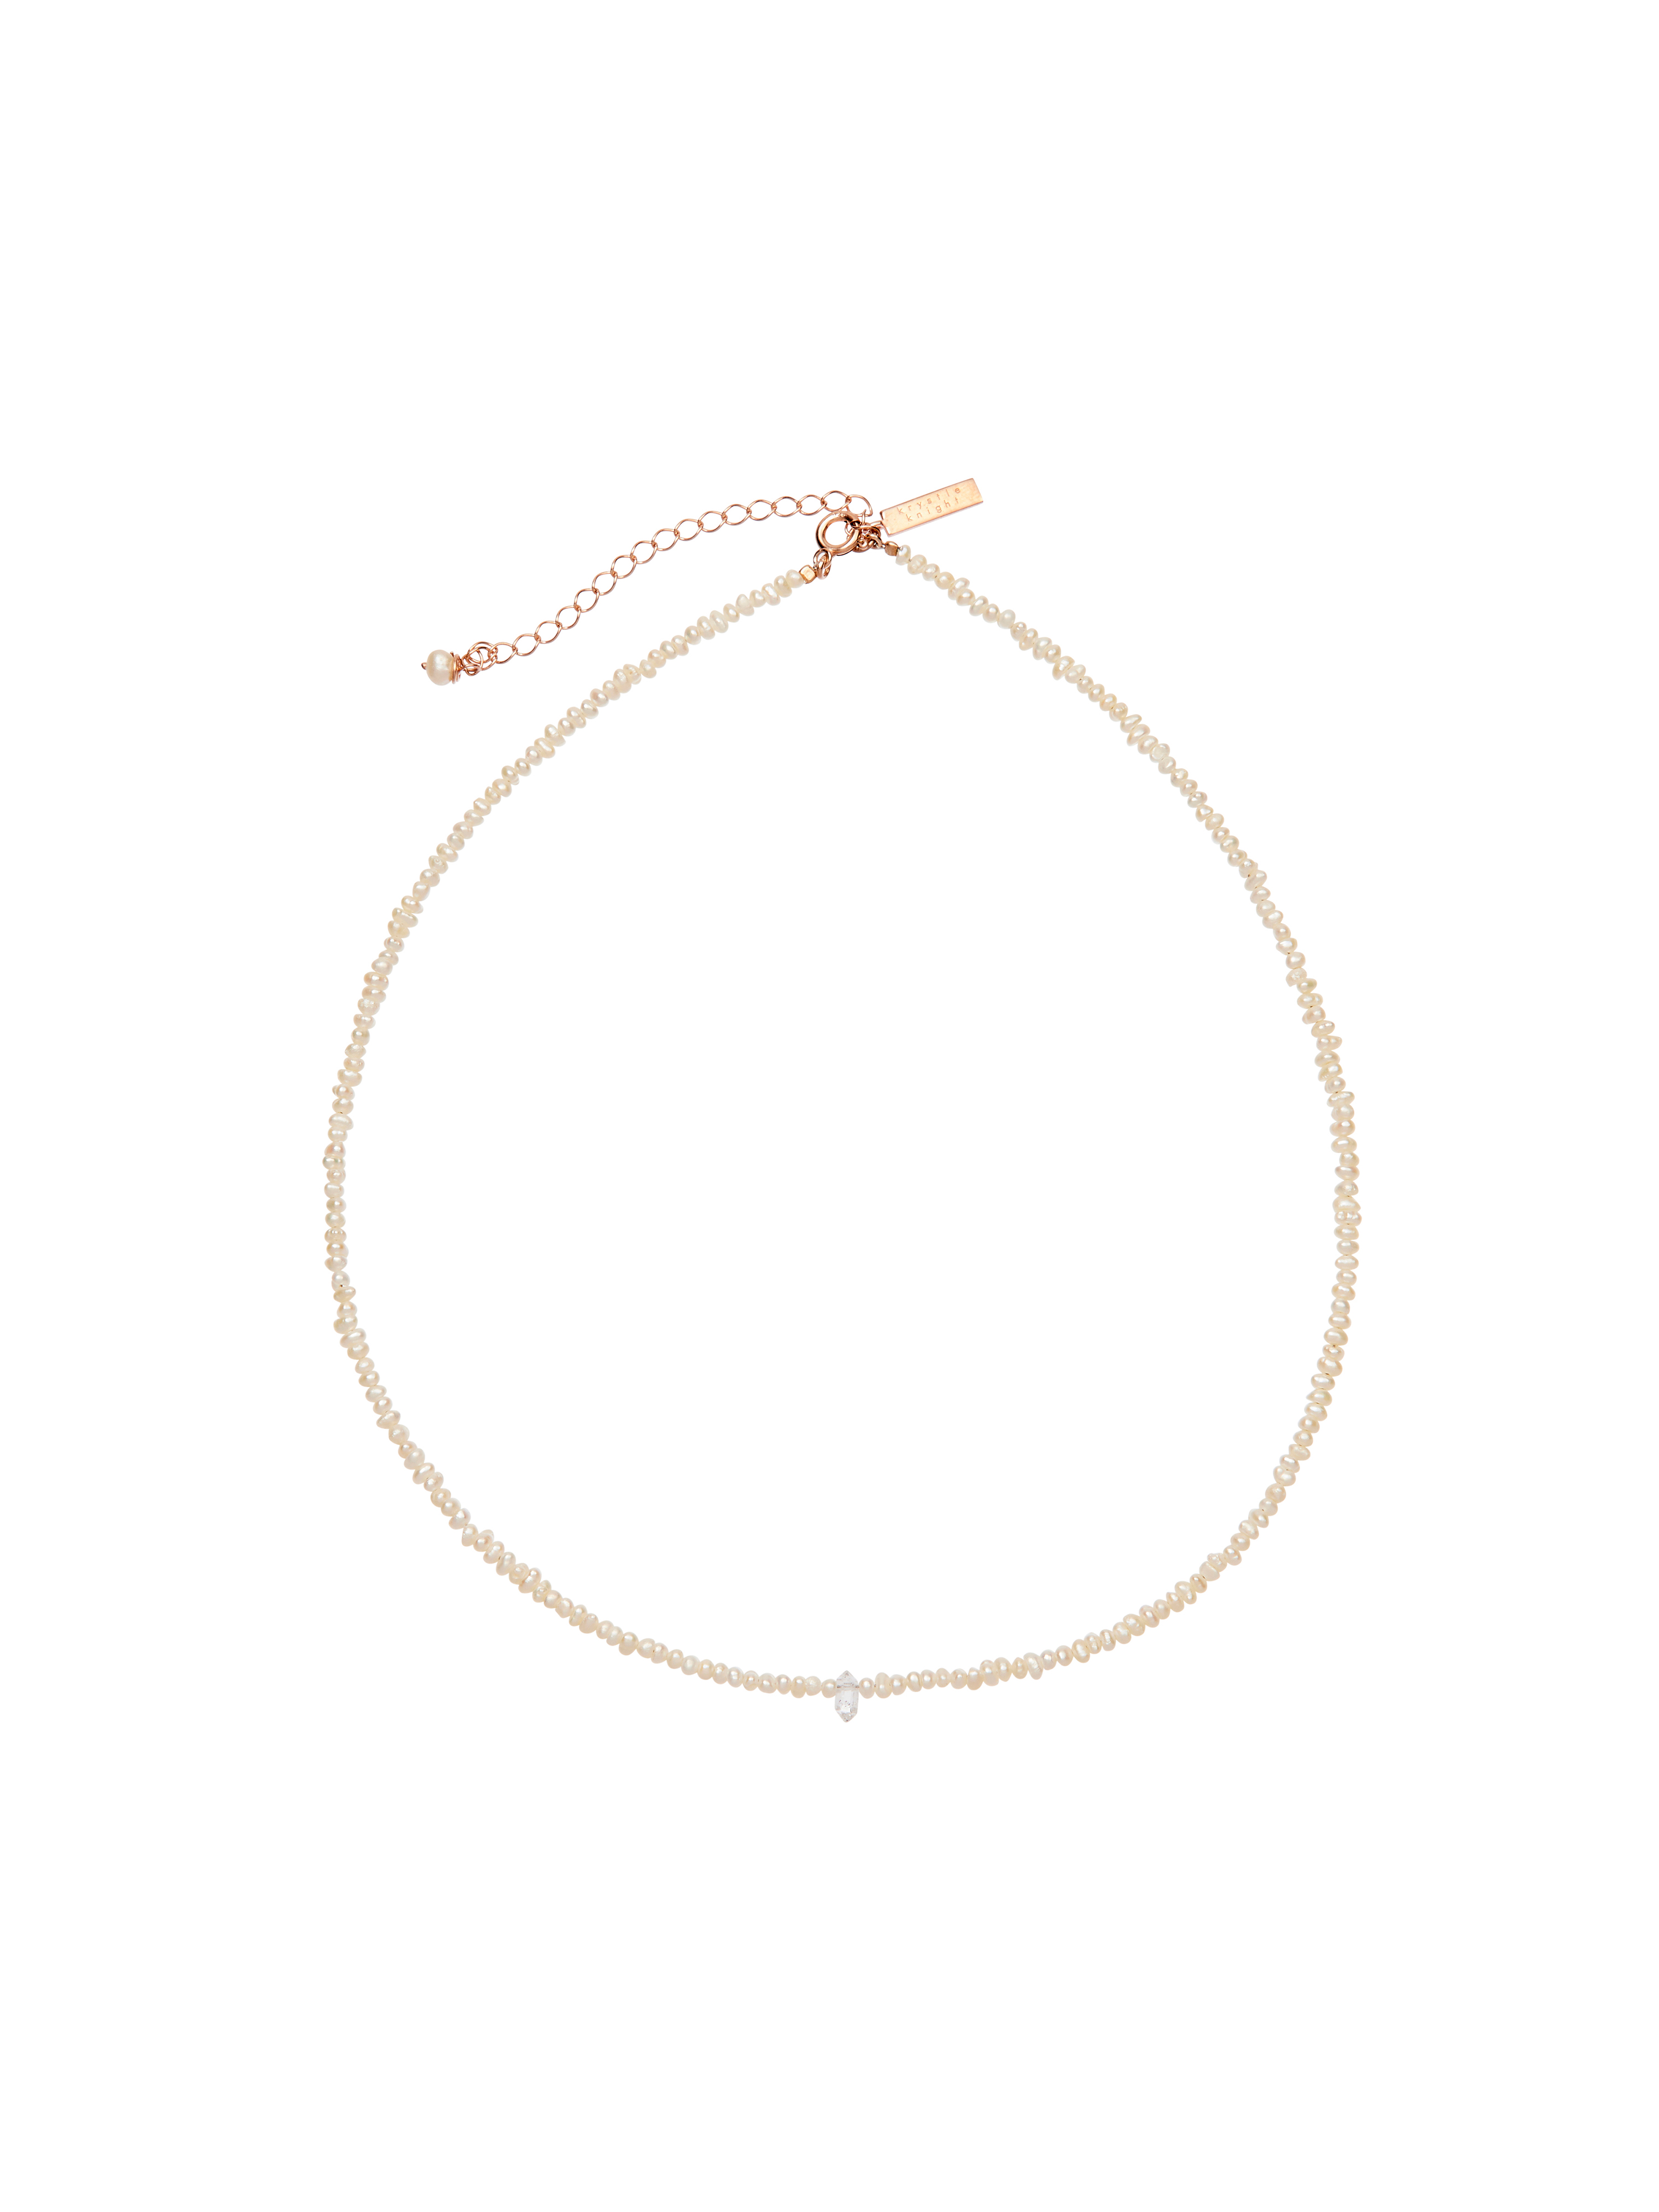 purity necklace | herkimer